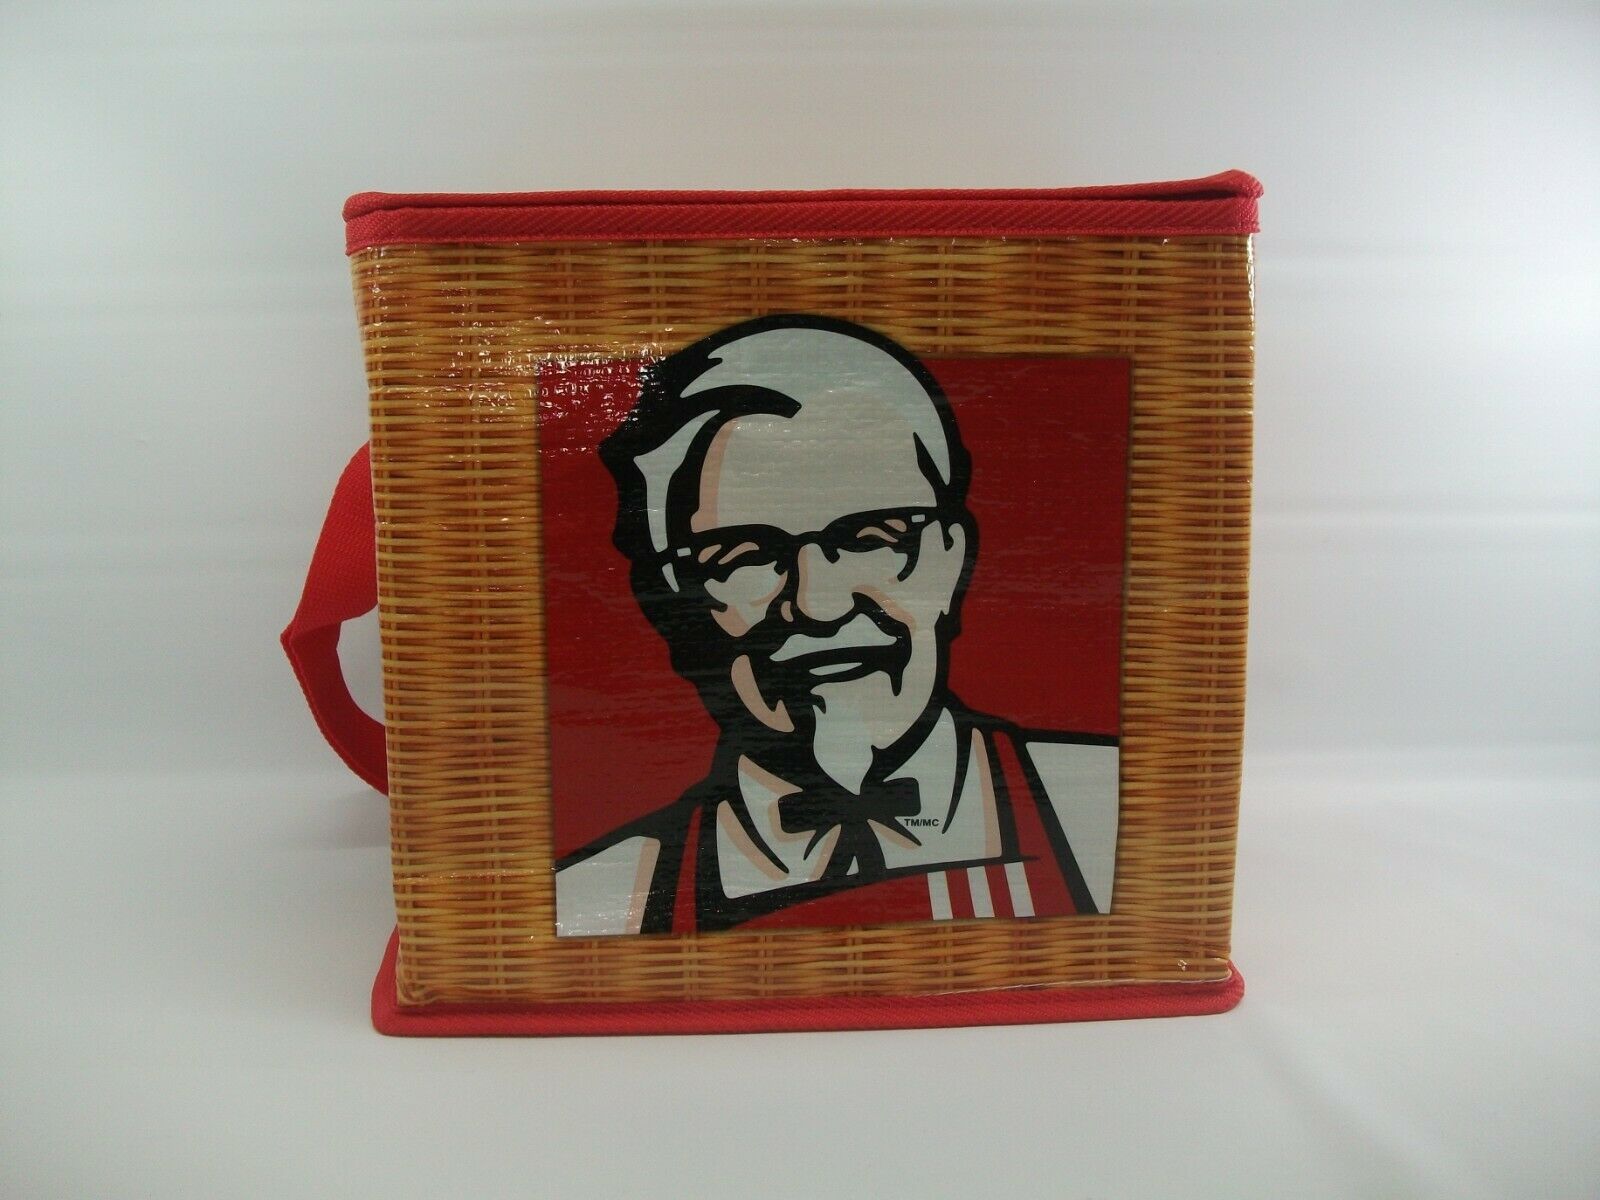 Primary image for KFC Insulated Cooler Delivery Warm Food Carrying Bag Kentucky Fried Chicken